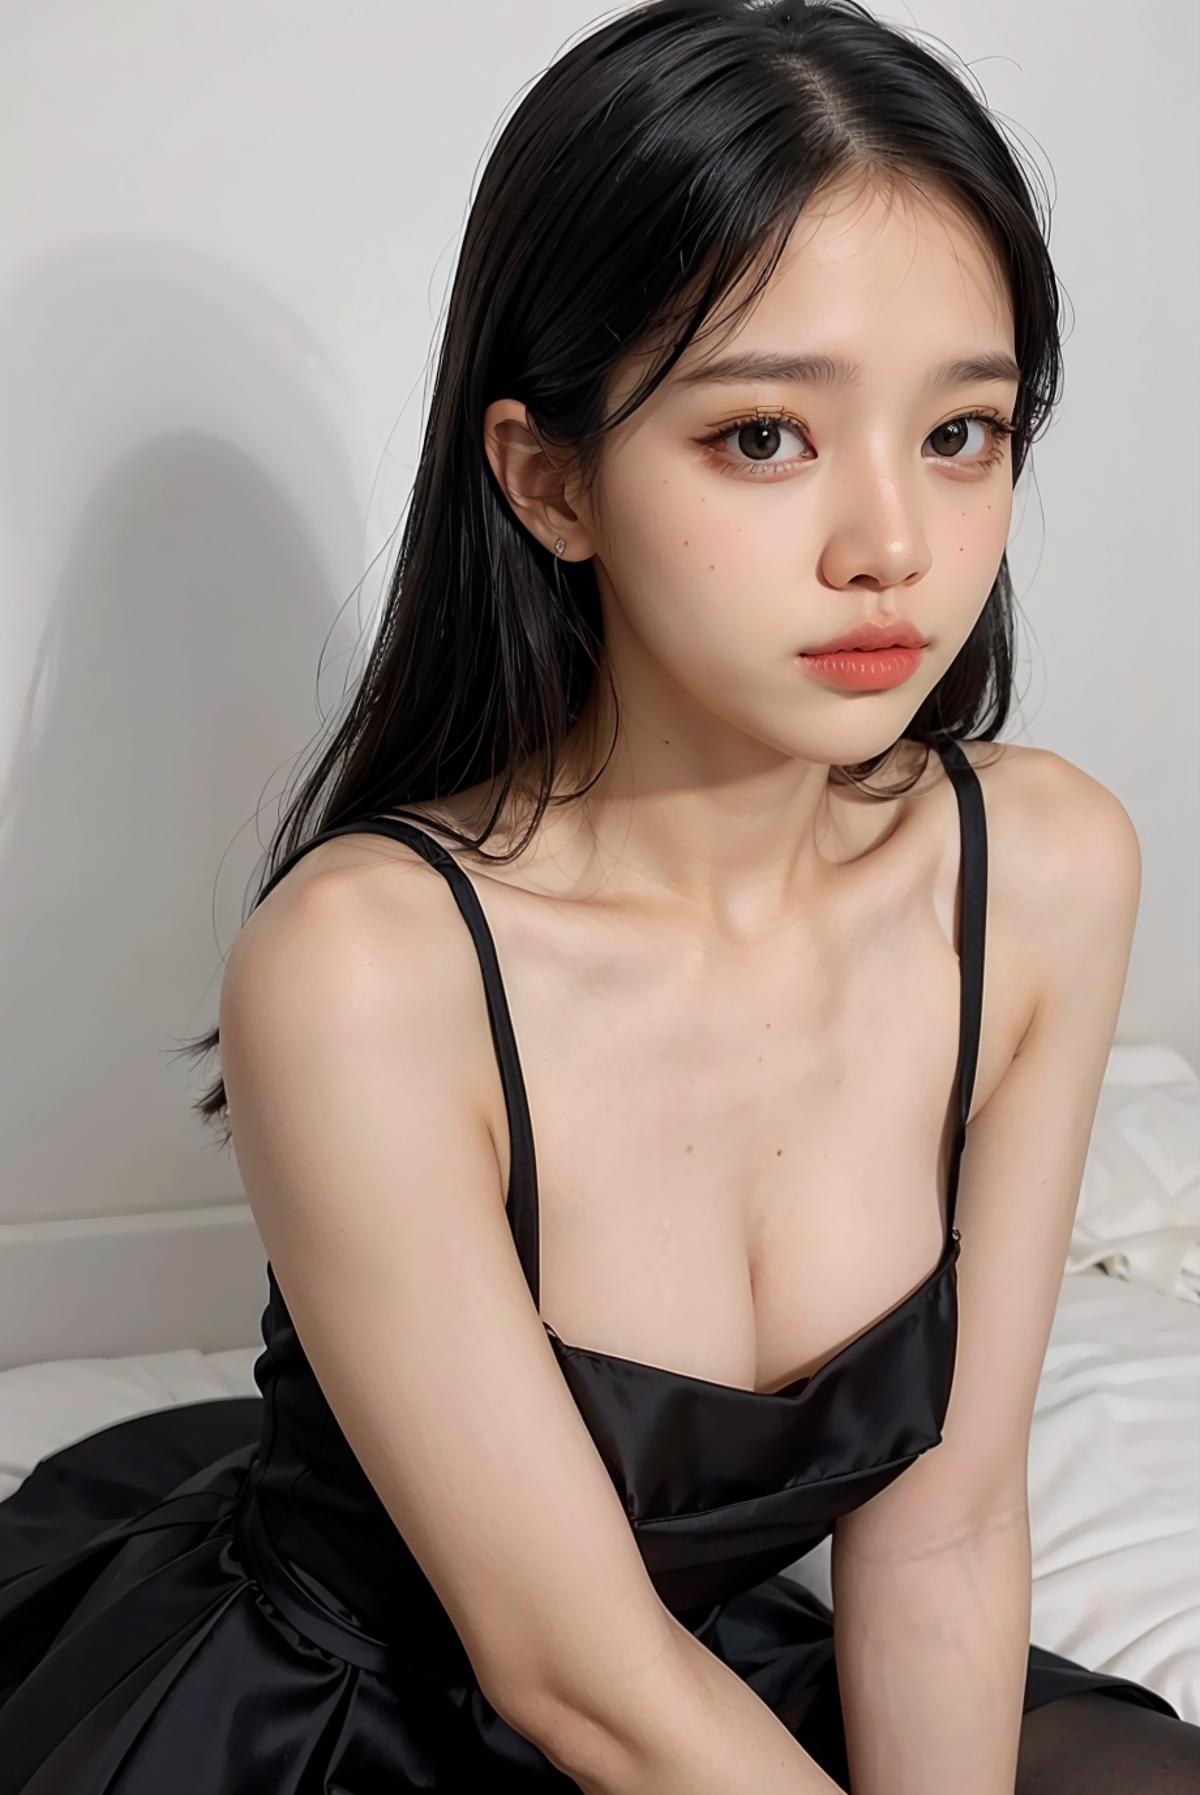 asian_sexdoll Onlyfans (Thai) image by Steven_Rogers_TH